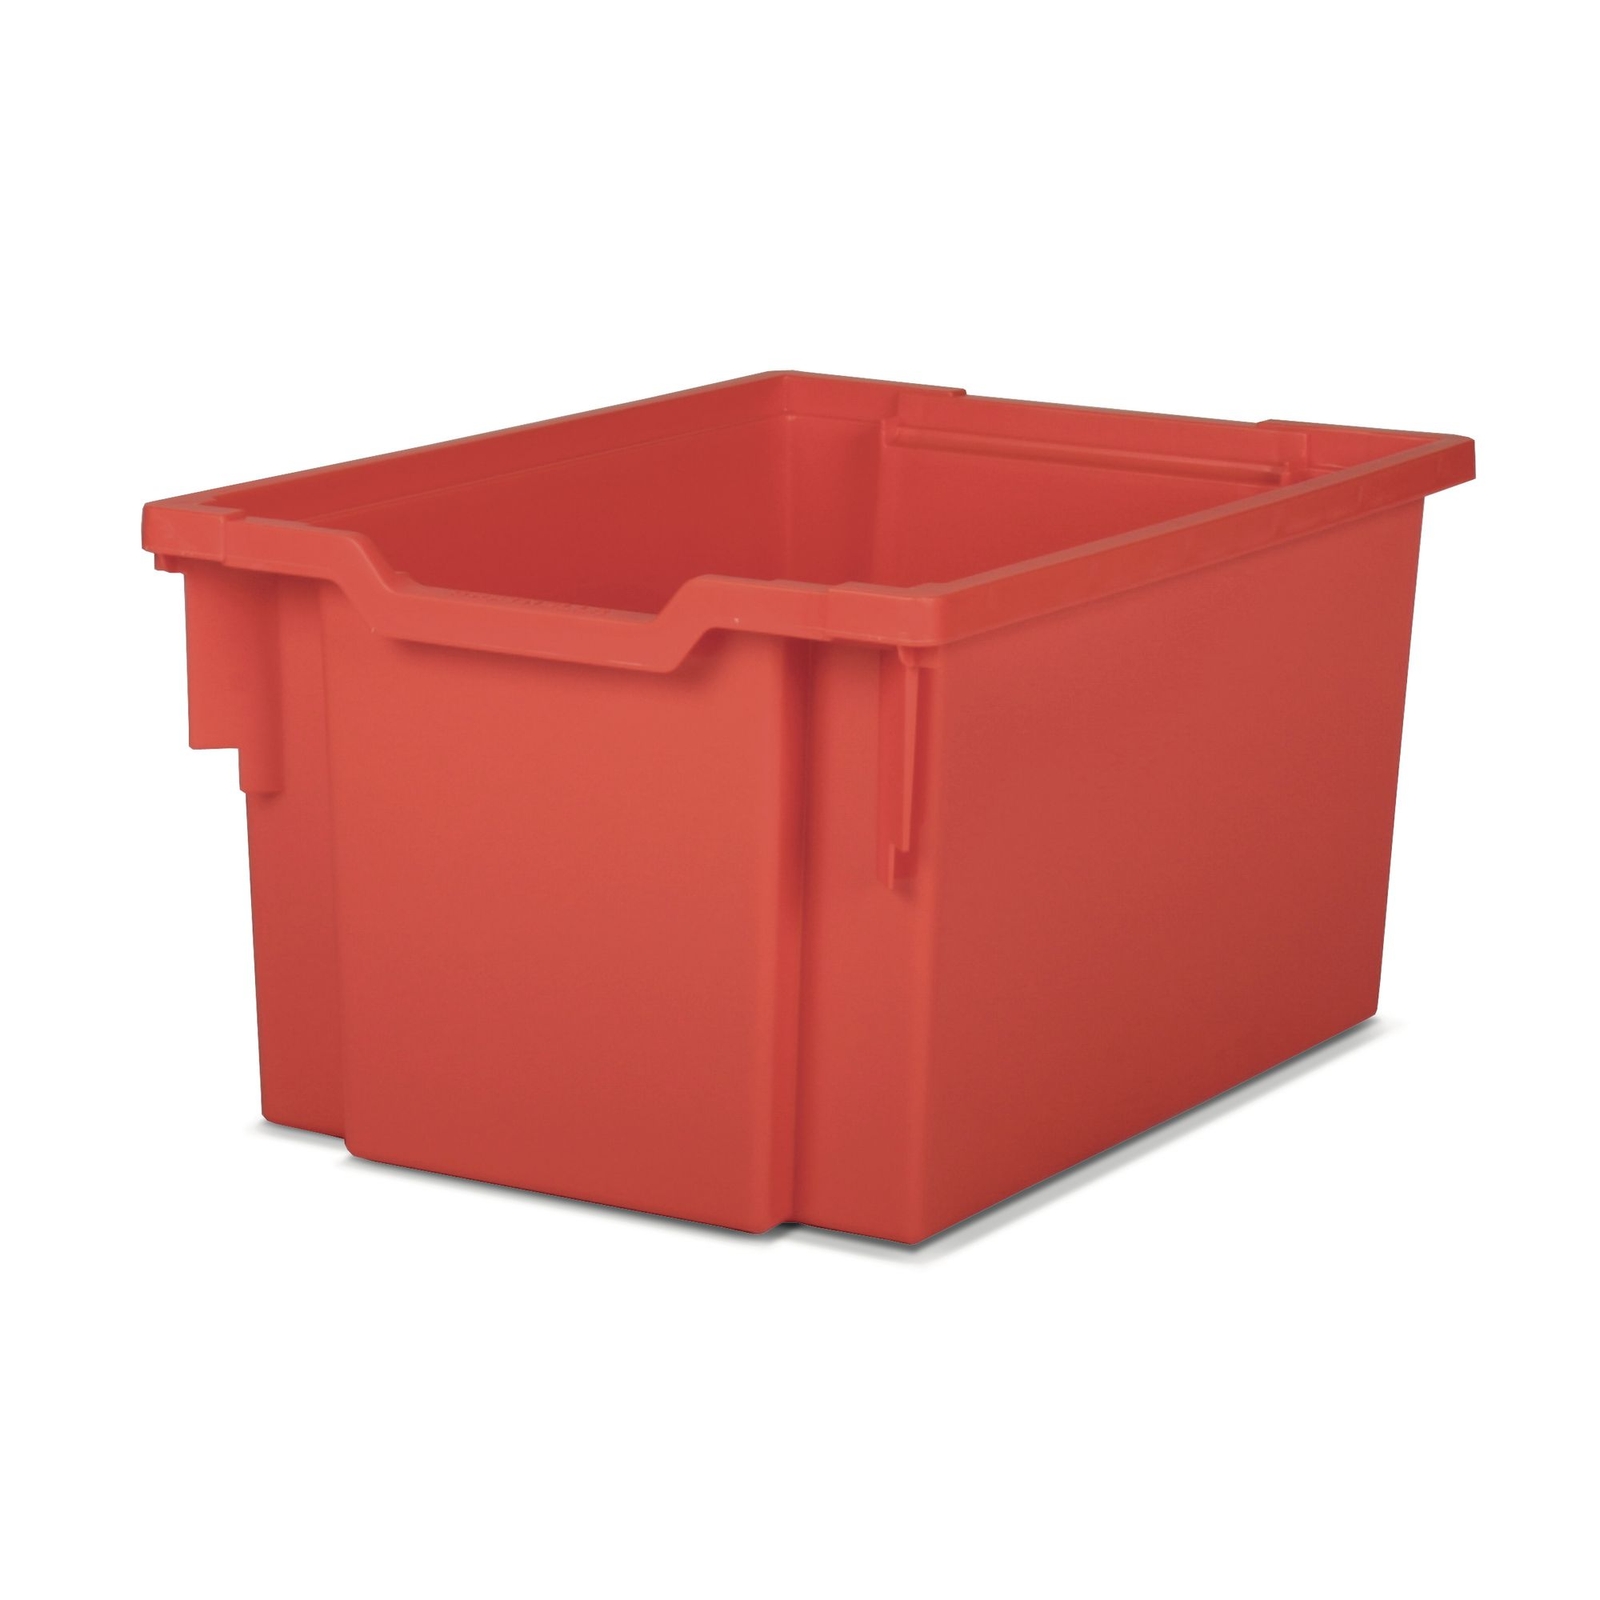 Gratnell Red Extra Deep Storage Tray - W312 x H225 x D430mm - Each